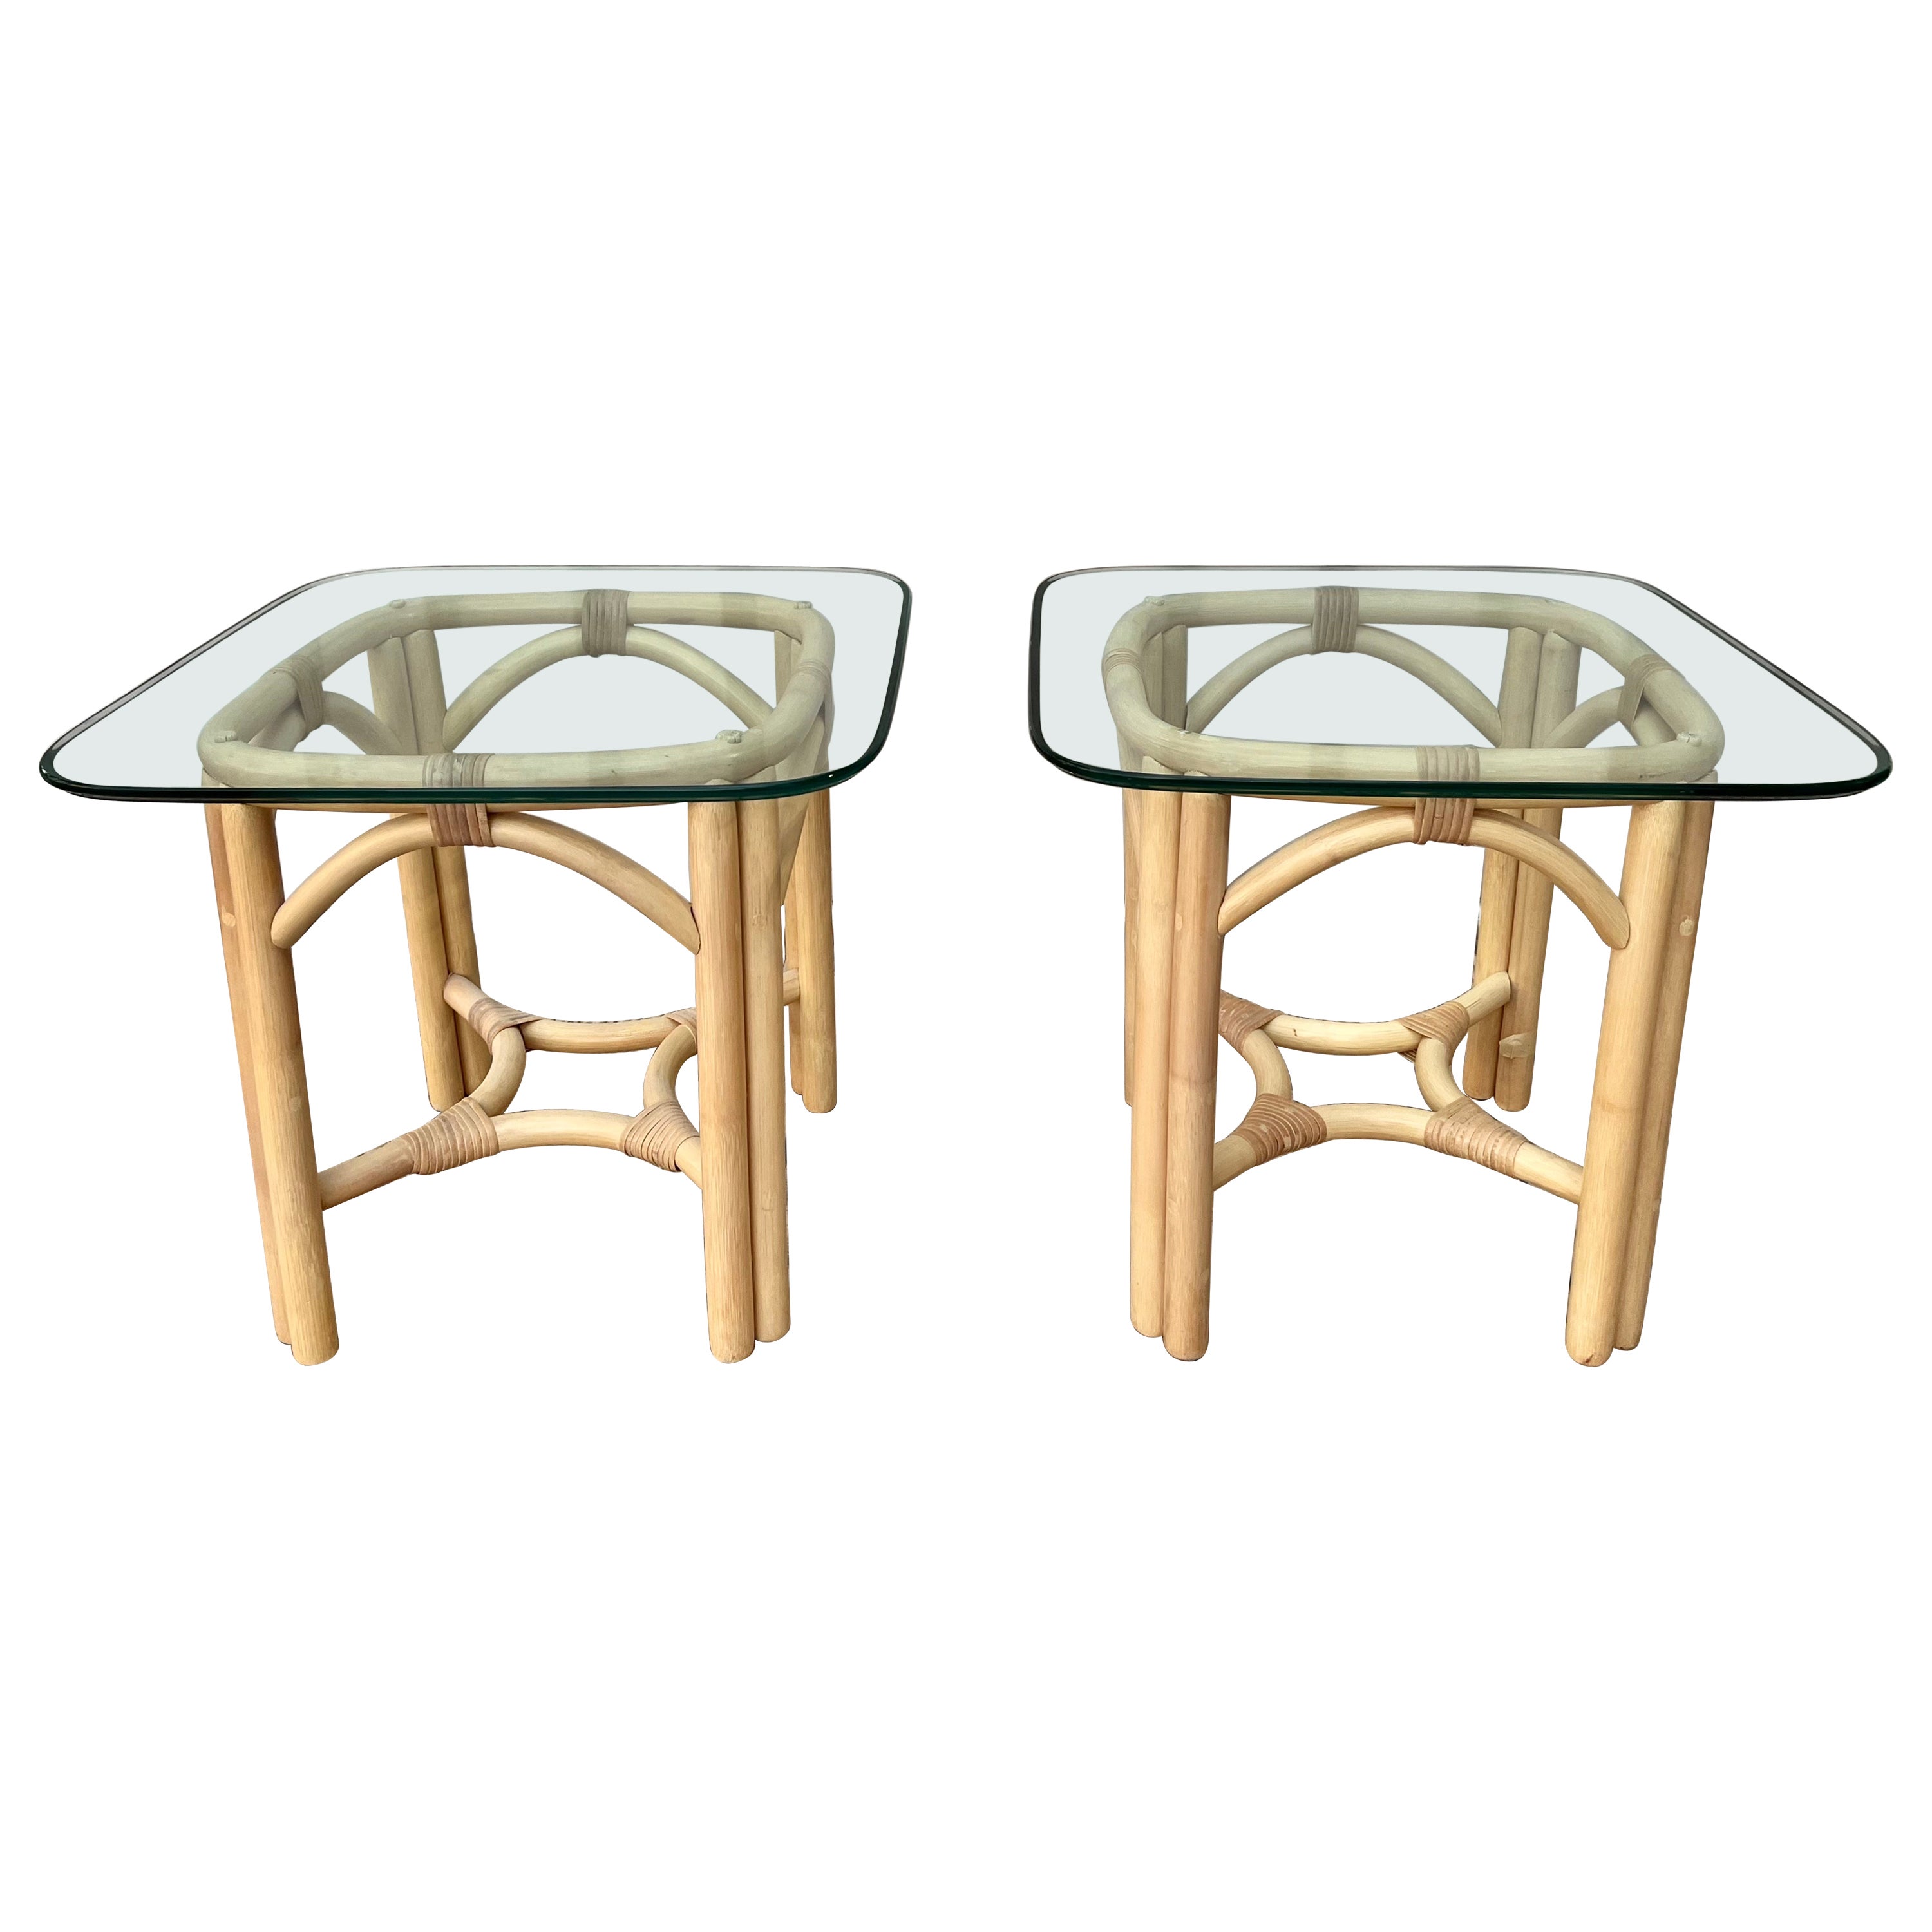 Pair of Vintage Coastal Style Rattan Glass-Top Side Tables, circa 1980s